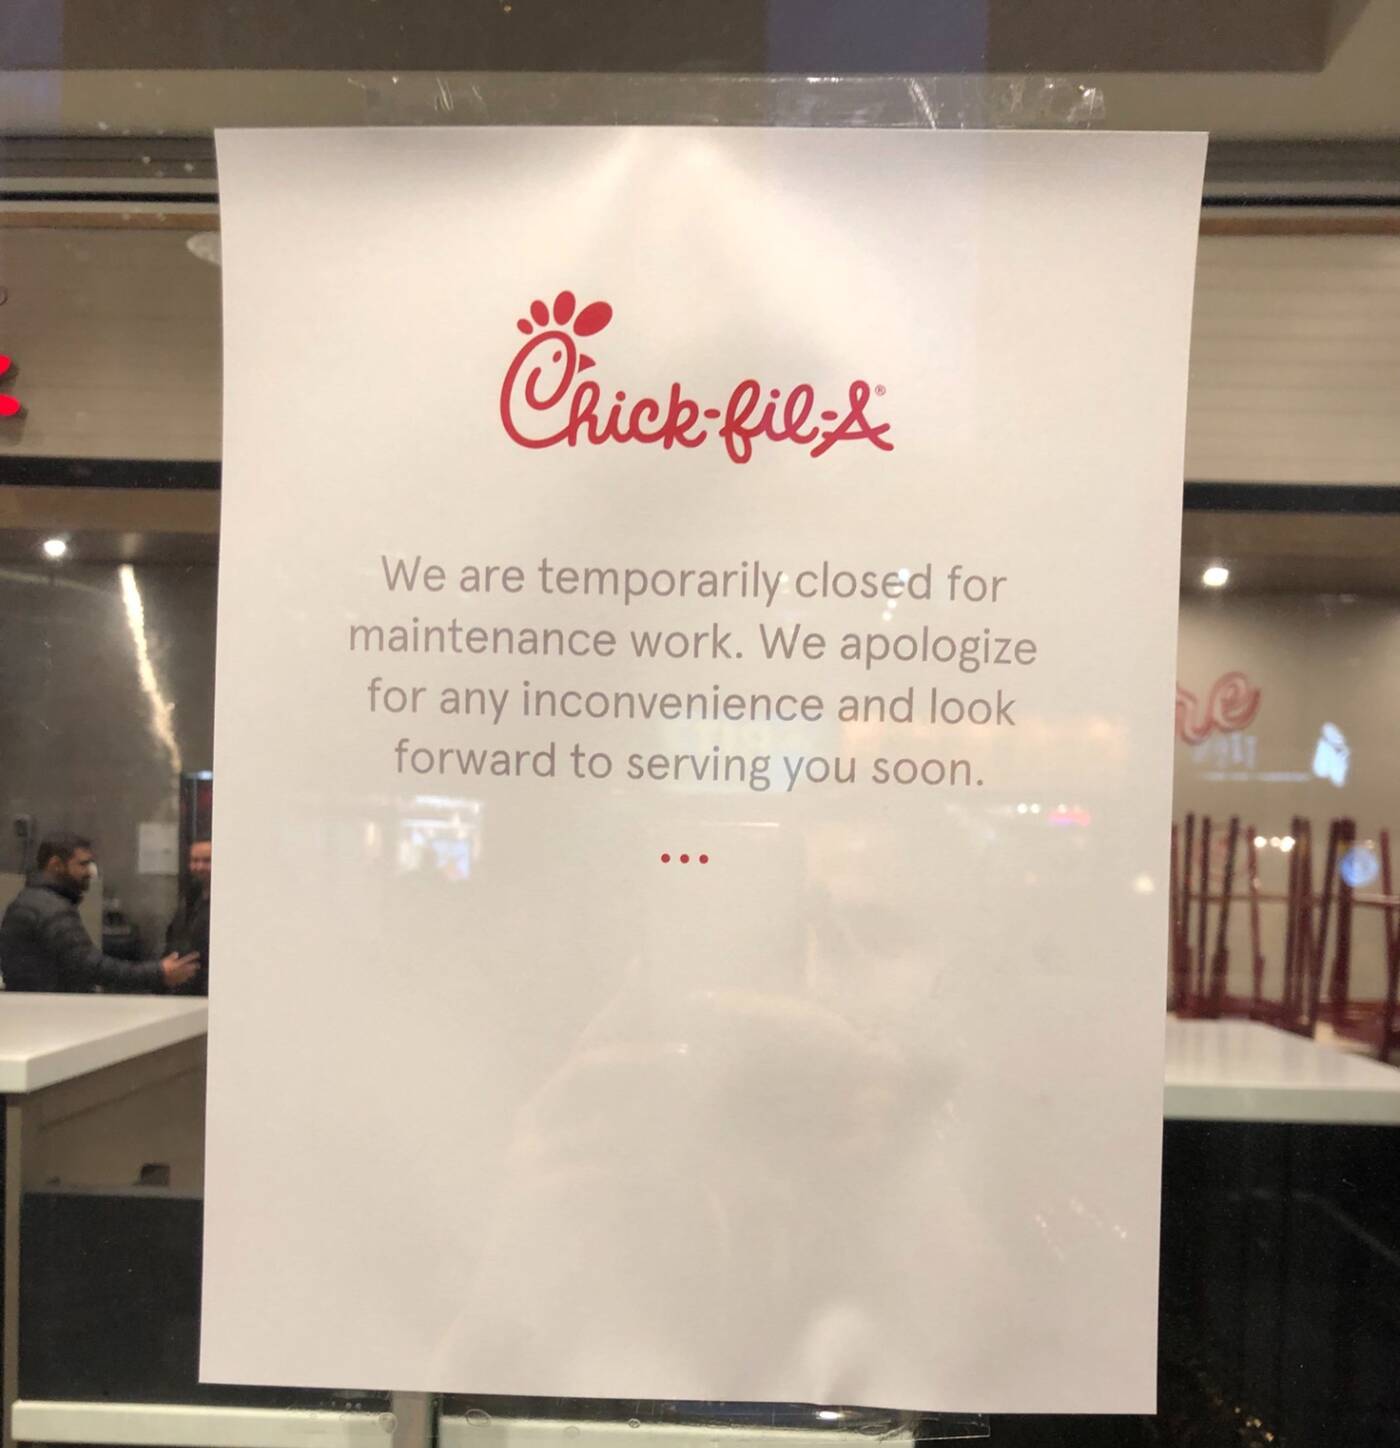 ChickfilA was mysteriously closed in Toronto today